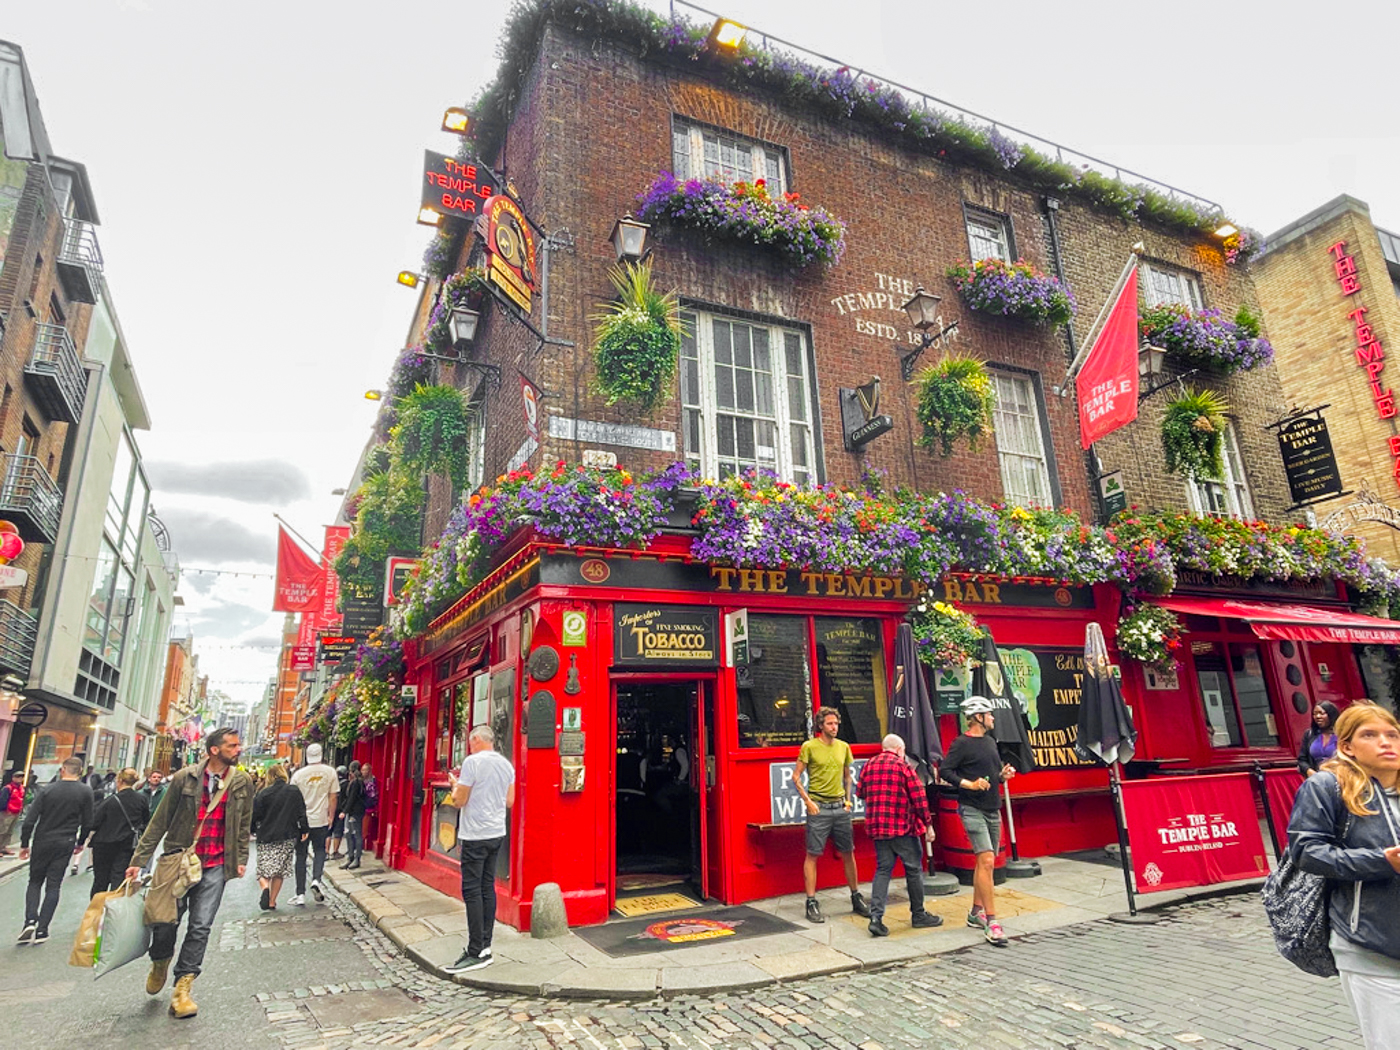 The bright red facade of the Temple Bar pub is adorned with hanging baskets, flags, and colourful flowers. The sky is cloudy and grey.